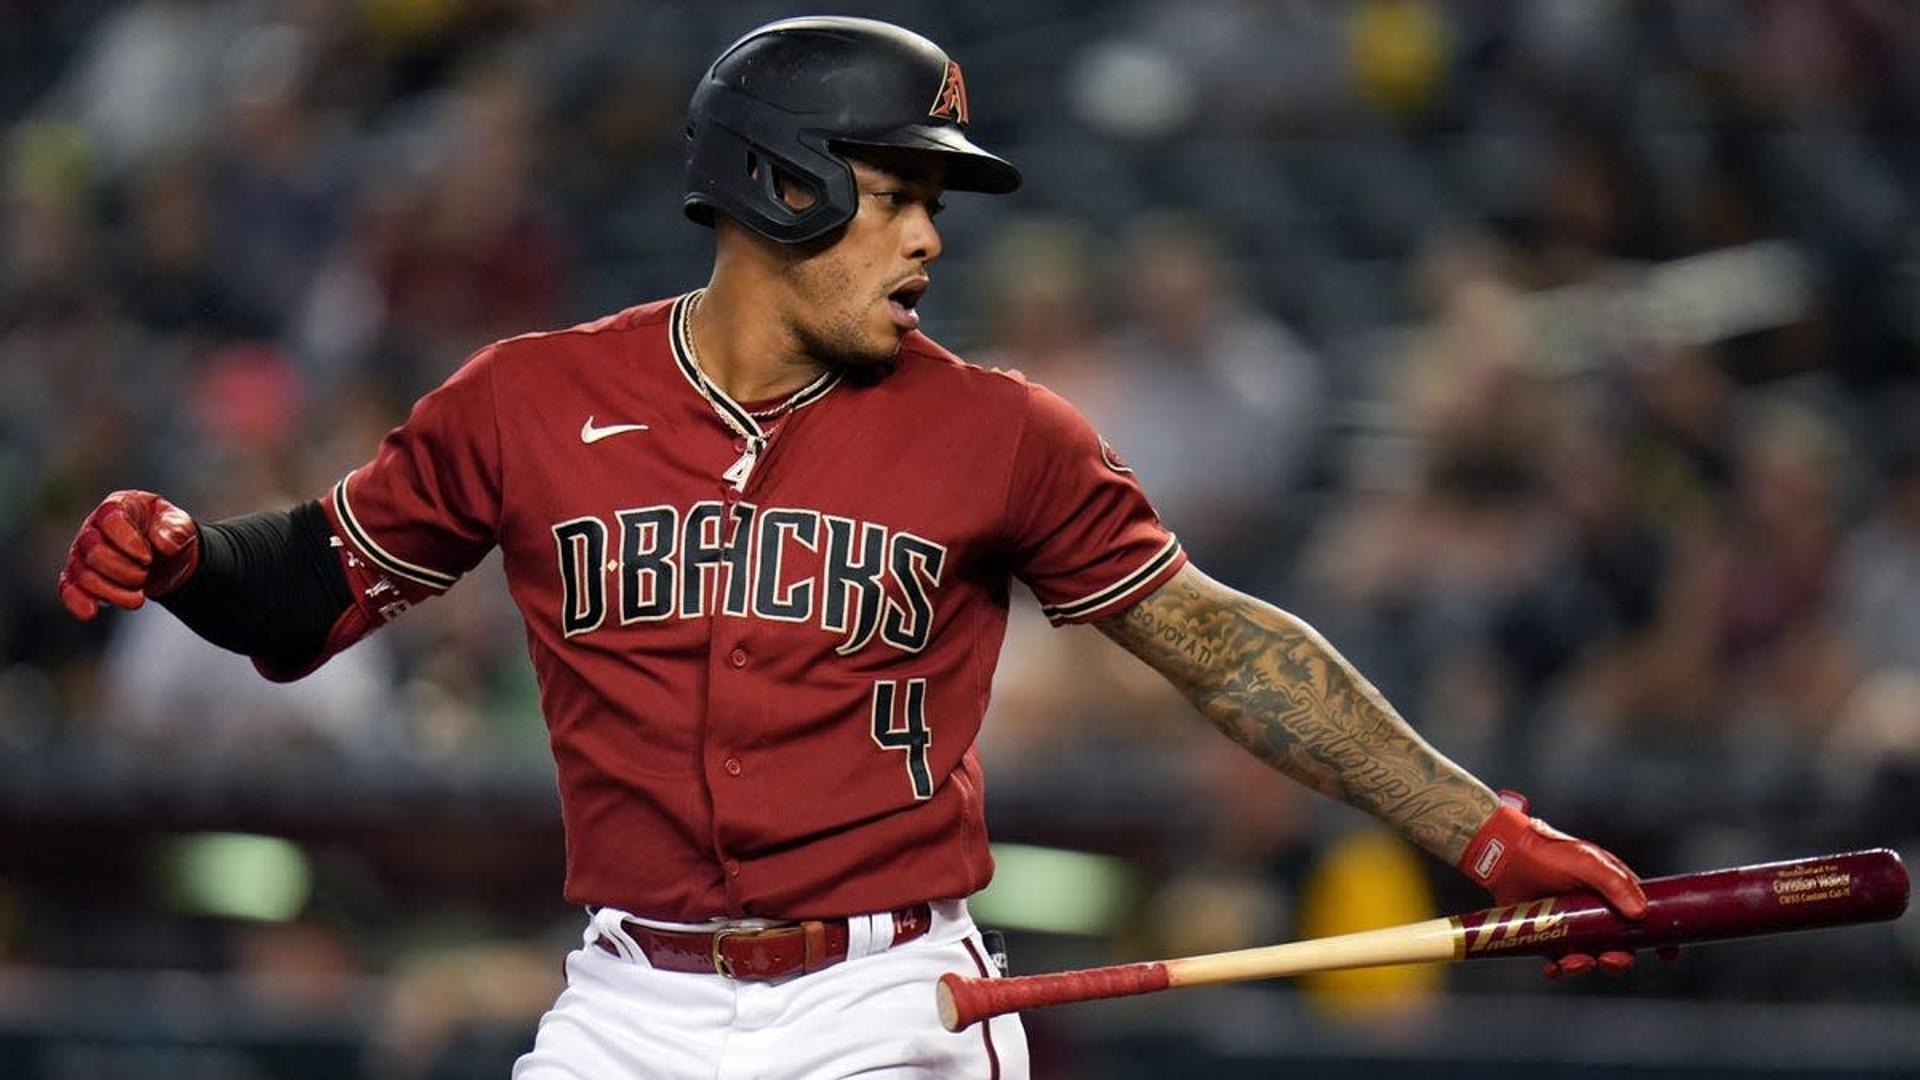 The match Arizona Diamondbacks vs Los Angeles Dodgers will take place at Chase Field in Pheonix on Tuesday, September 13 at 9:40 PM ET.